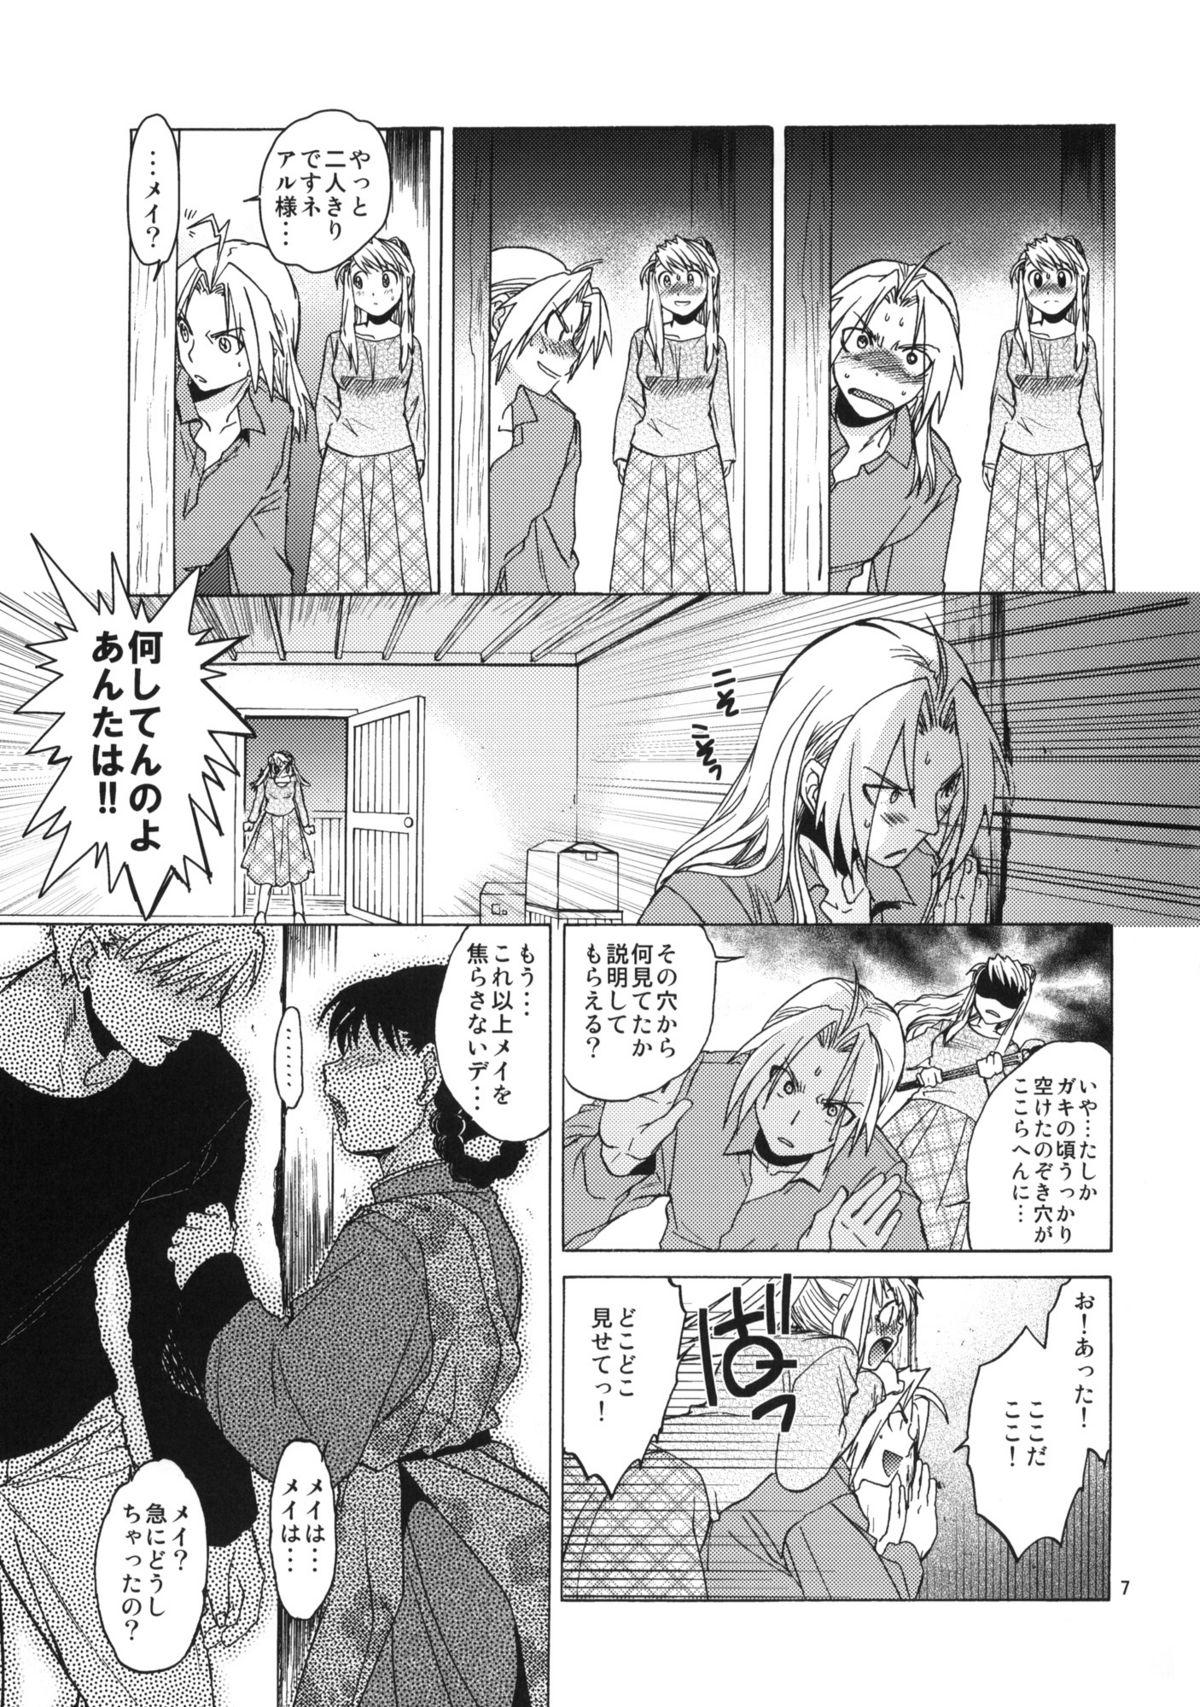 Hairy Pussy EDxWIN 5 Al x May! - Fullmetal alchemist Eurobabe - Page 6